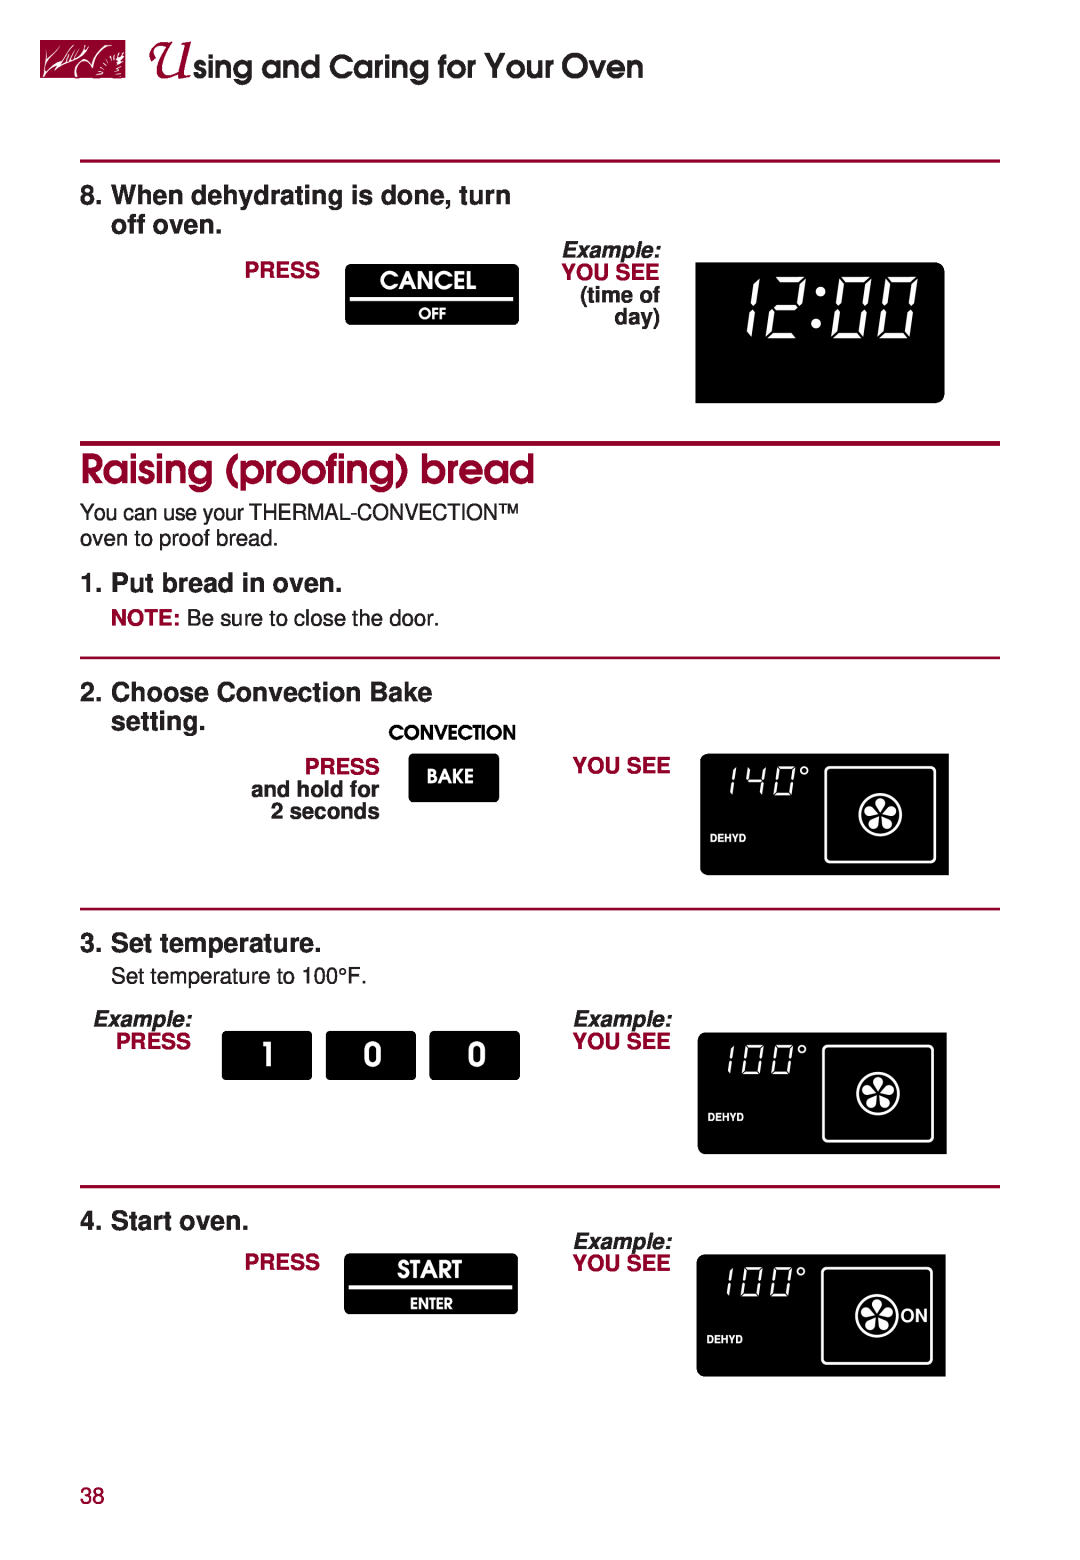 KitchenAid KERS507 Raising proofing bread, When dehydrating is done, turn off oven, Put bread in oven, Set temperature 